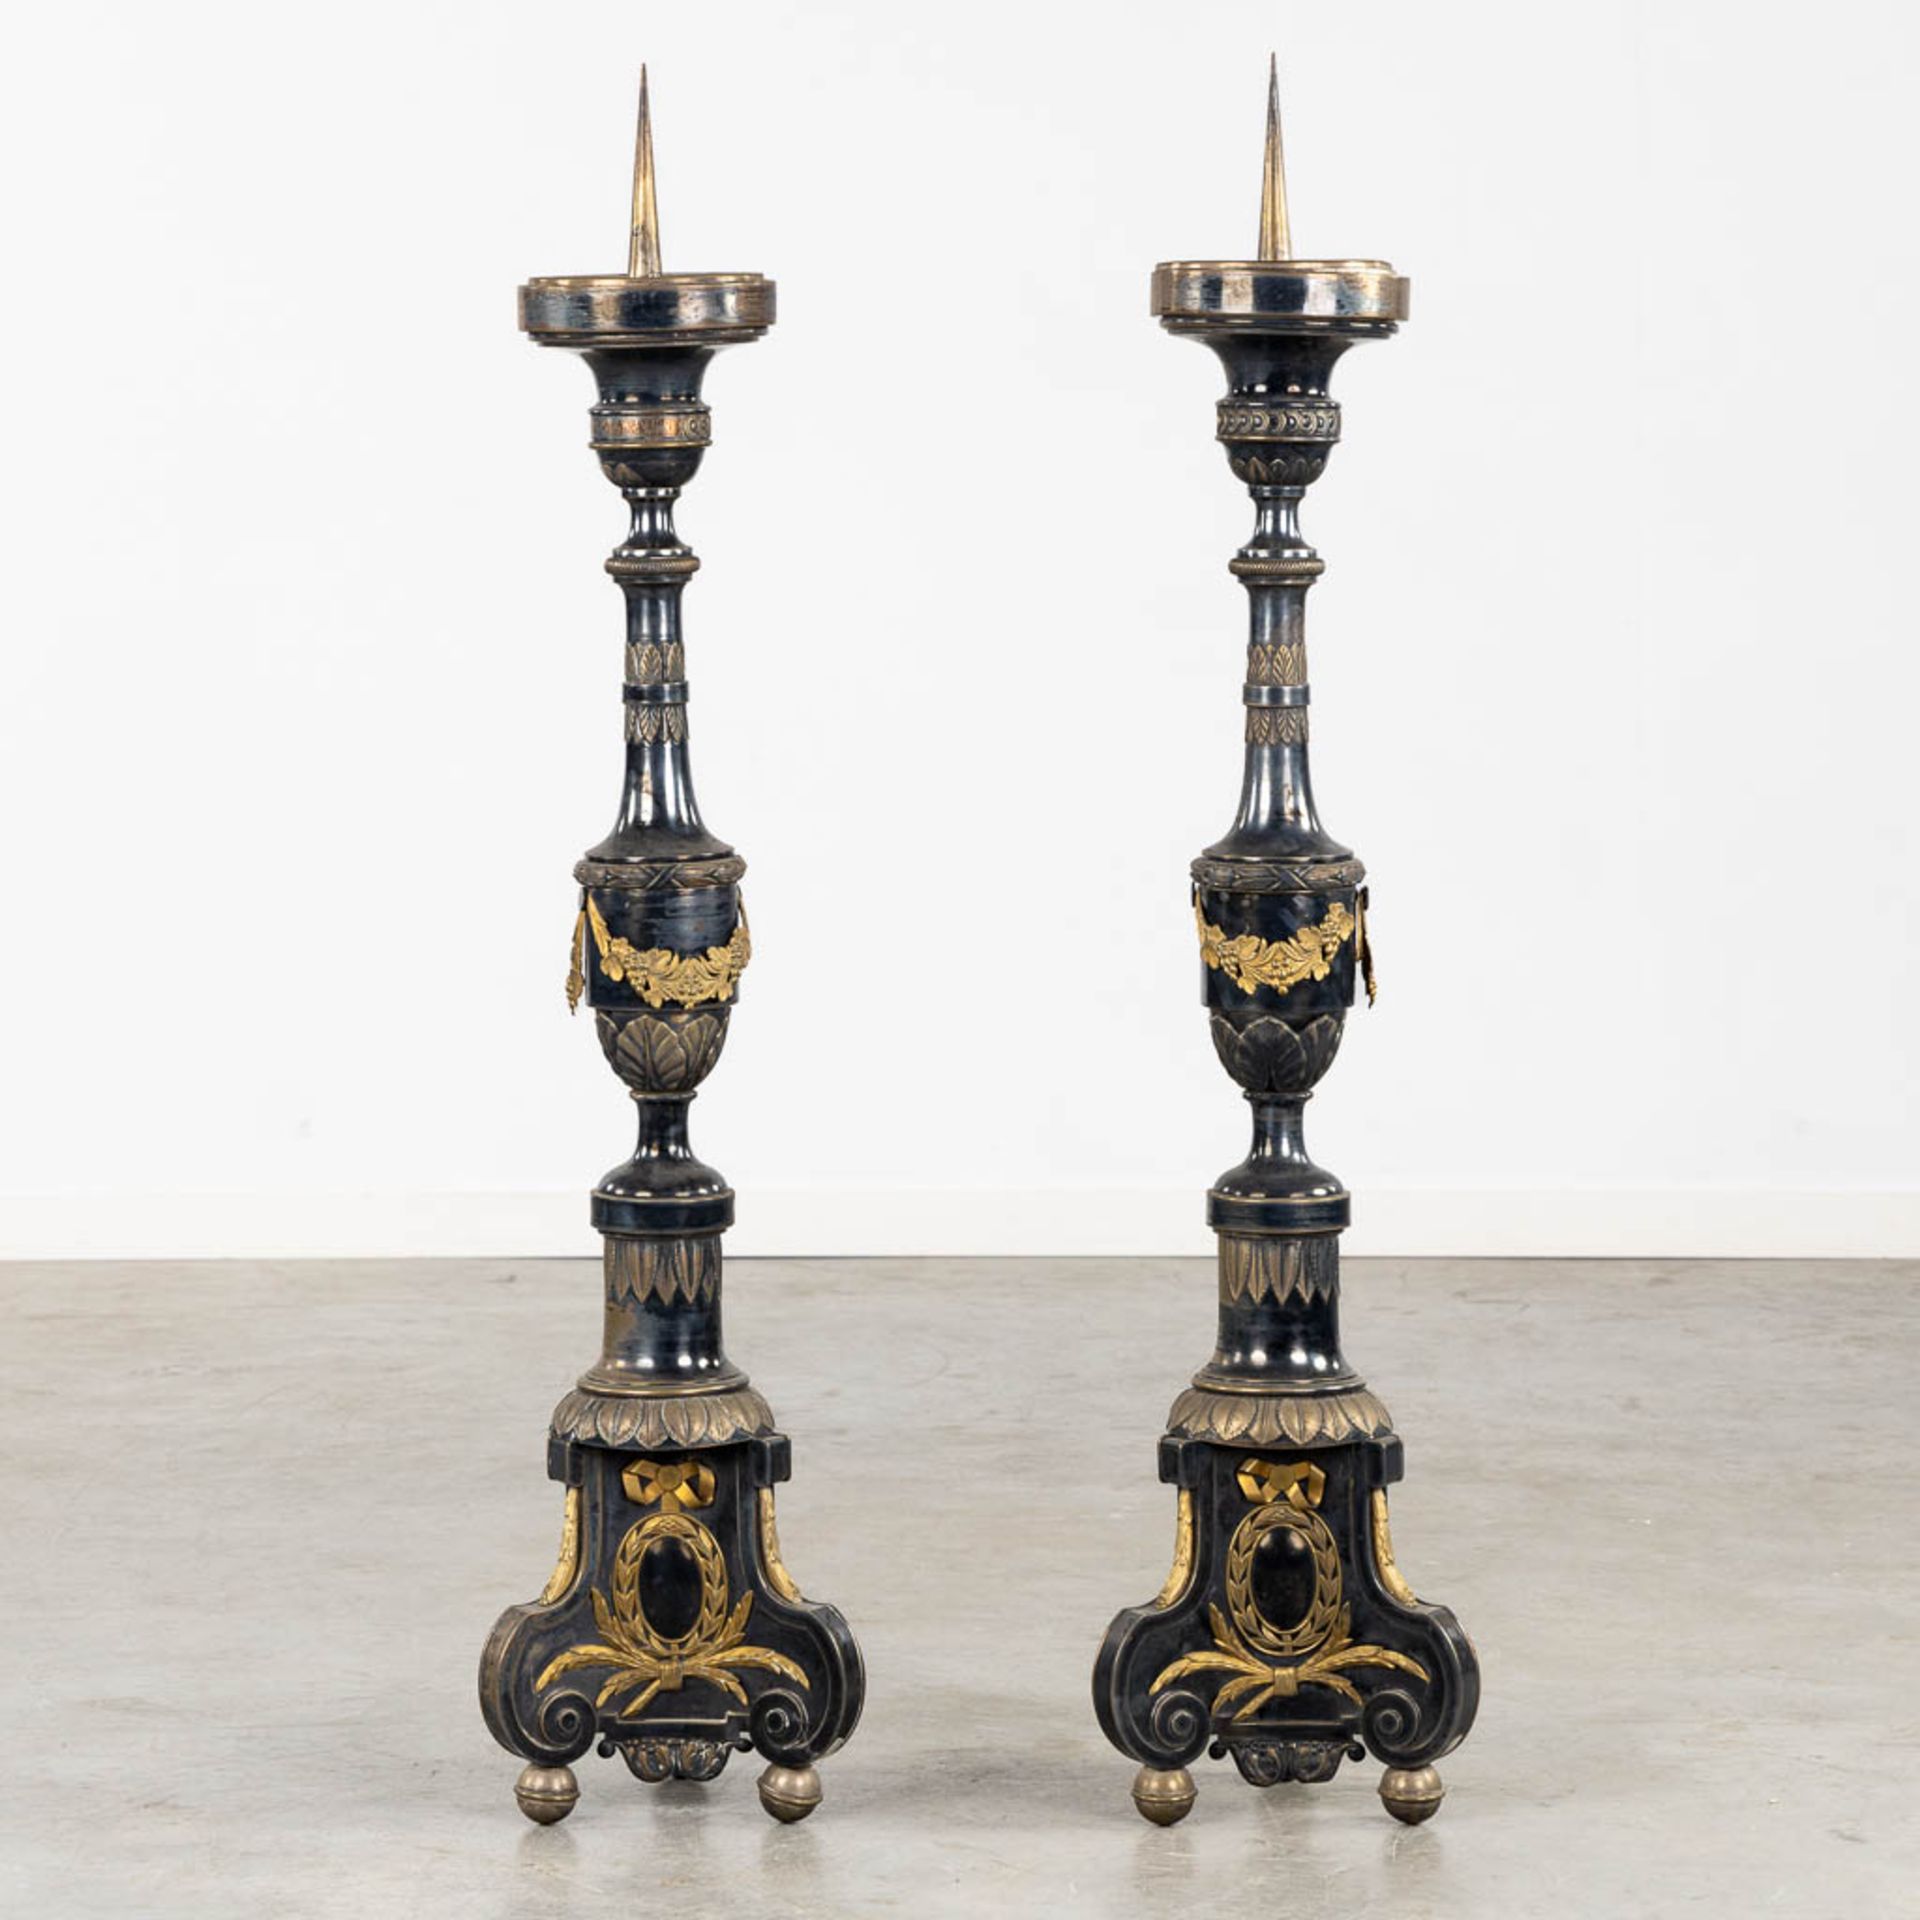 A pair of Church Candlesticks, silver- and gold-plated metal. 19th C. (H:120 cm)